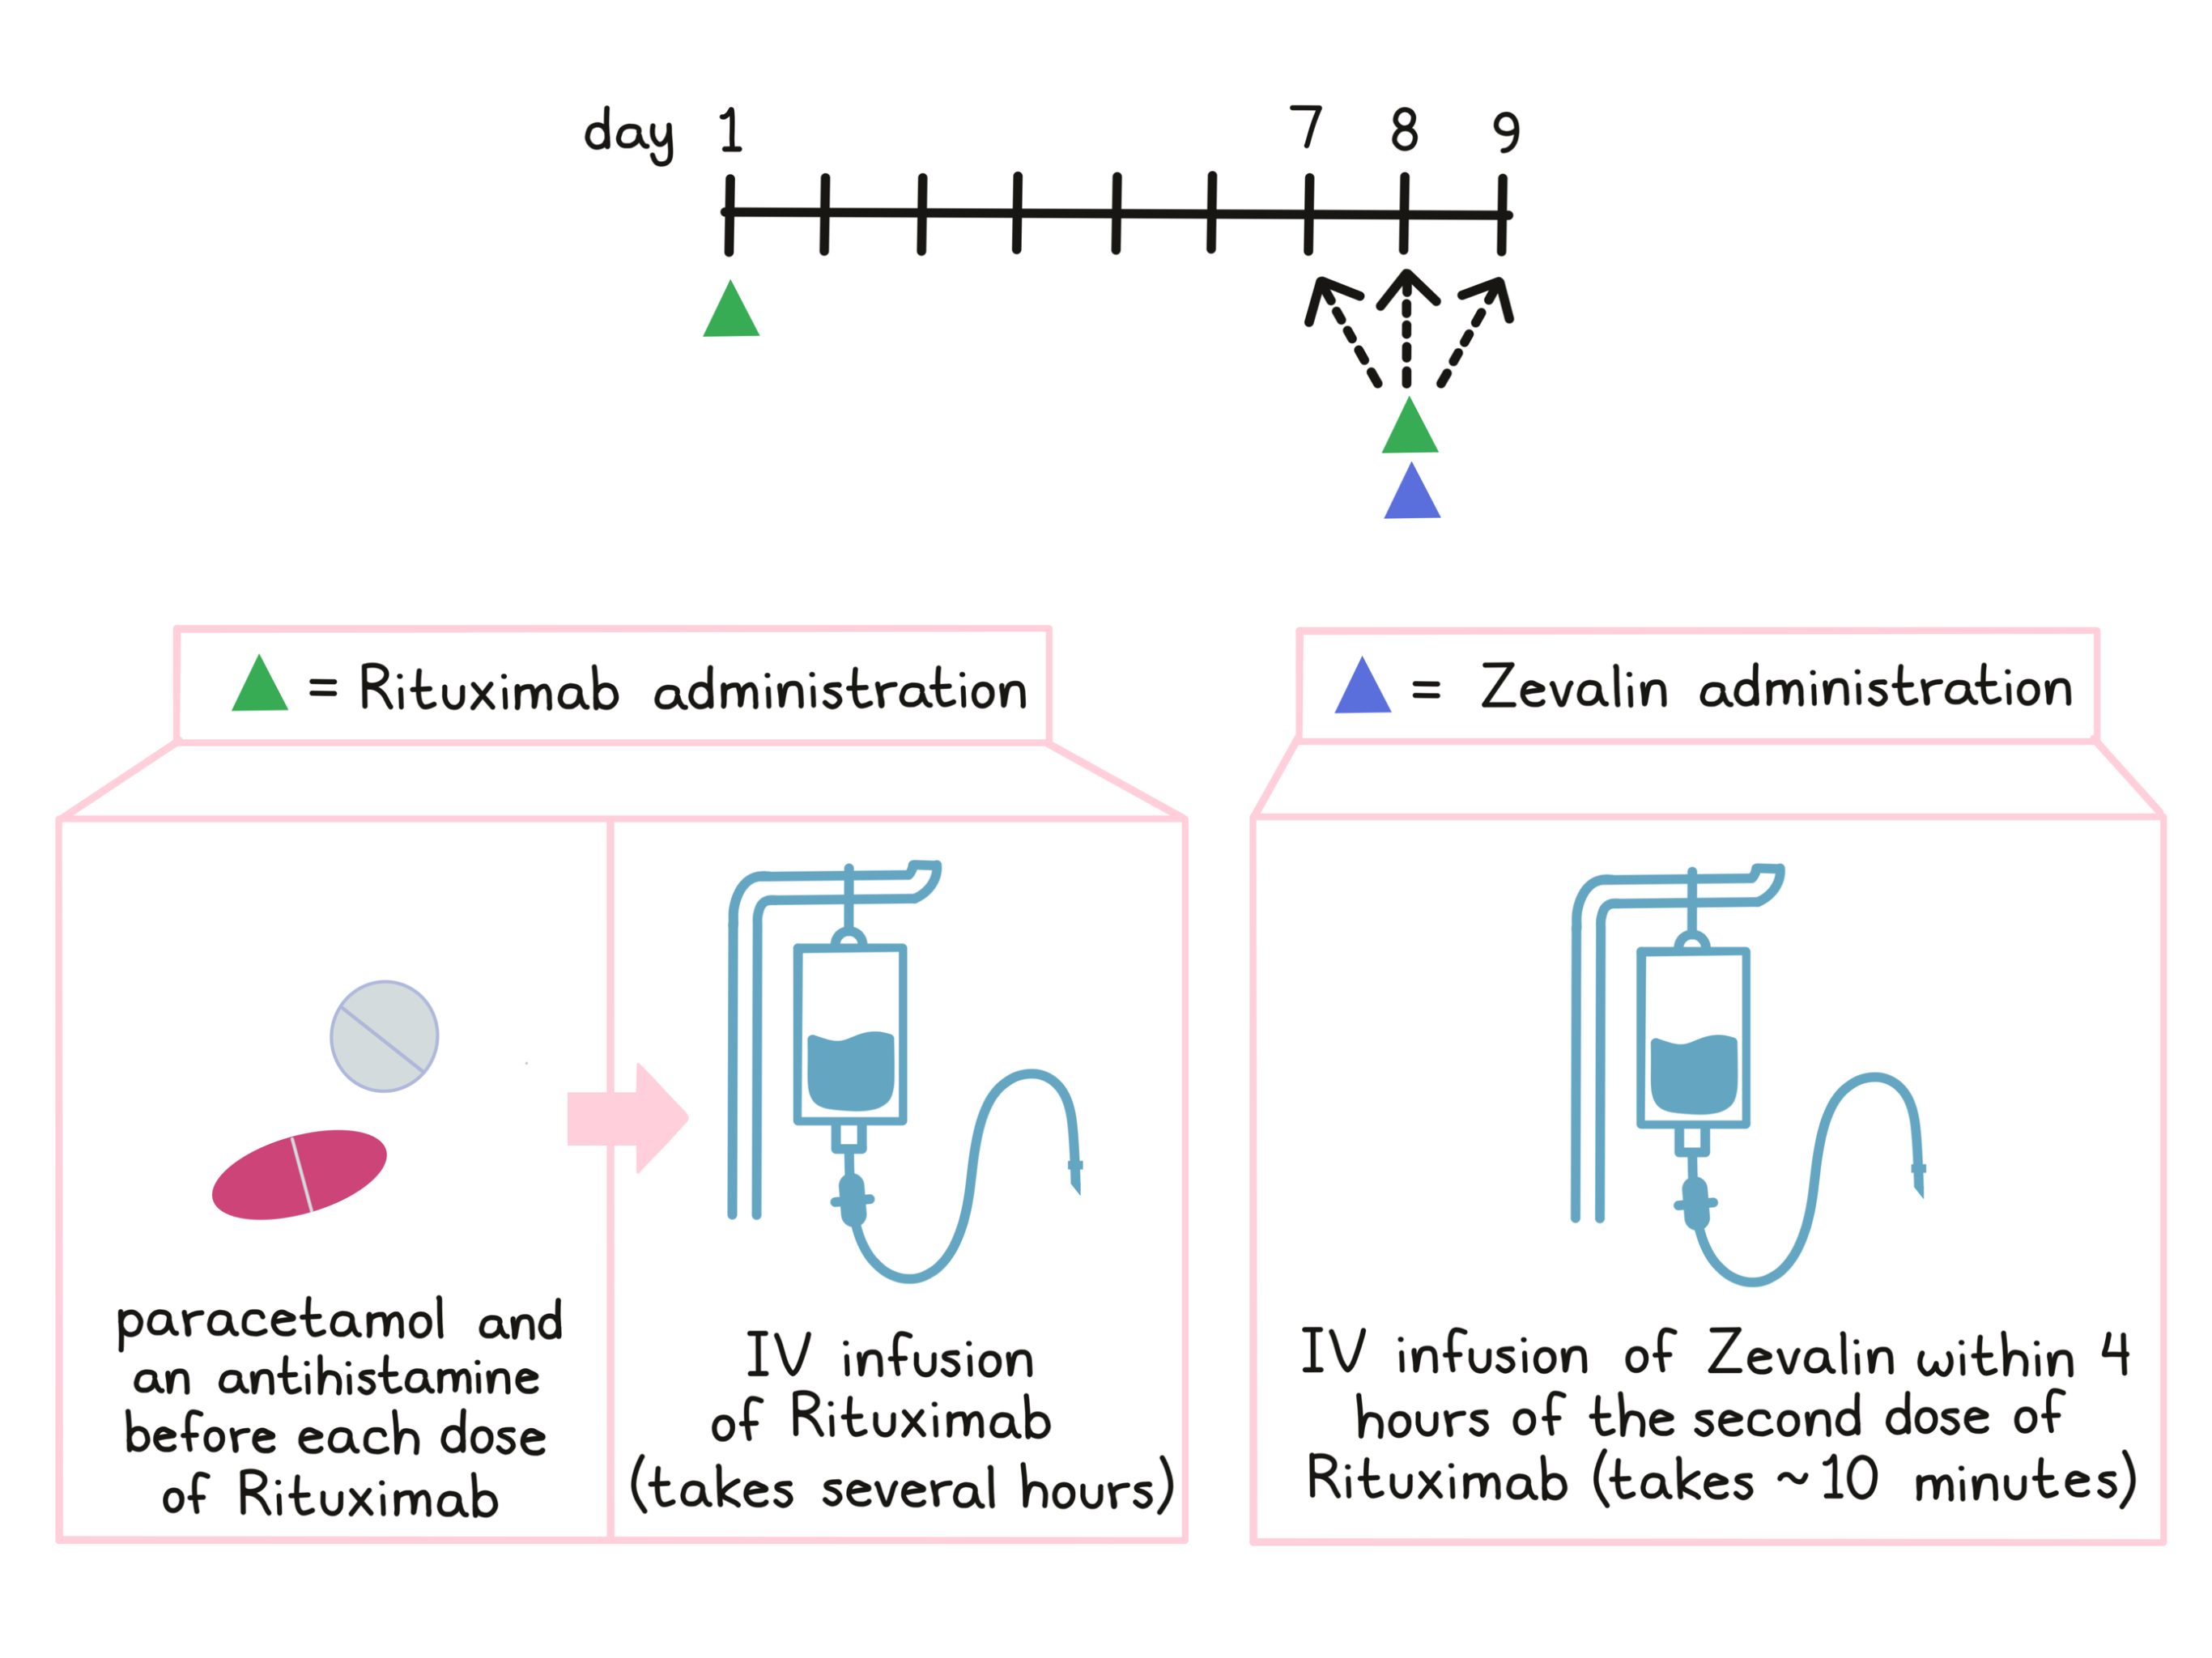 Illustration showing how Zevalin is administered 